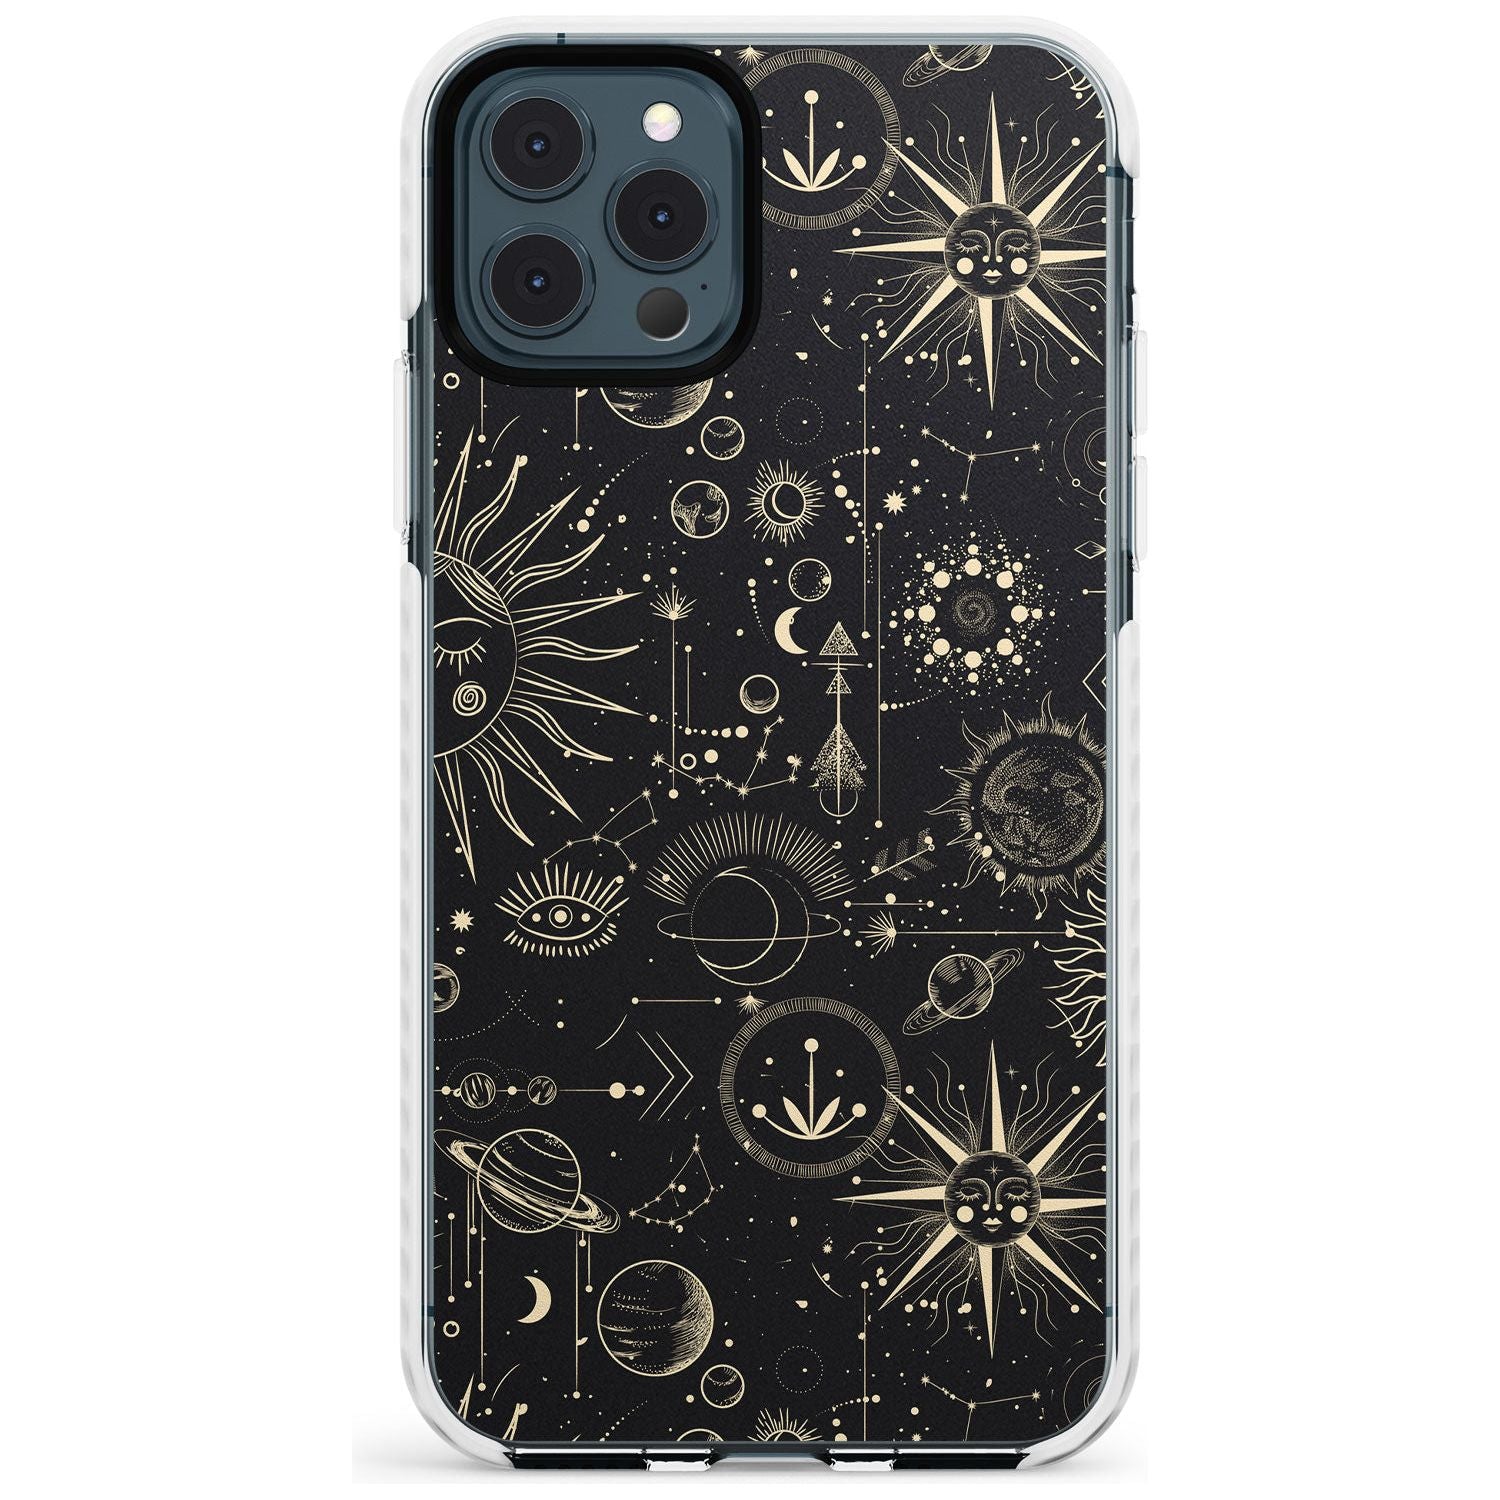 Suns & Planets Slim TPU Phone Case for iPhone 11 Pro Max